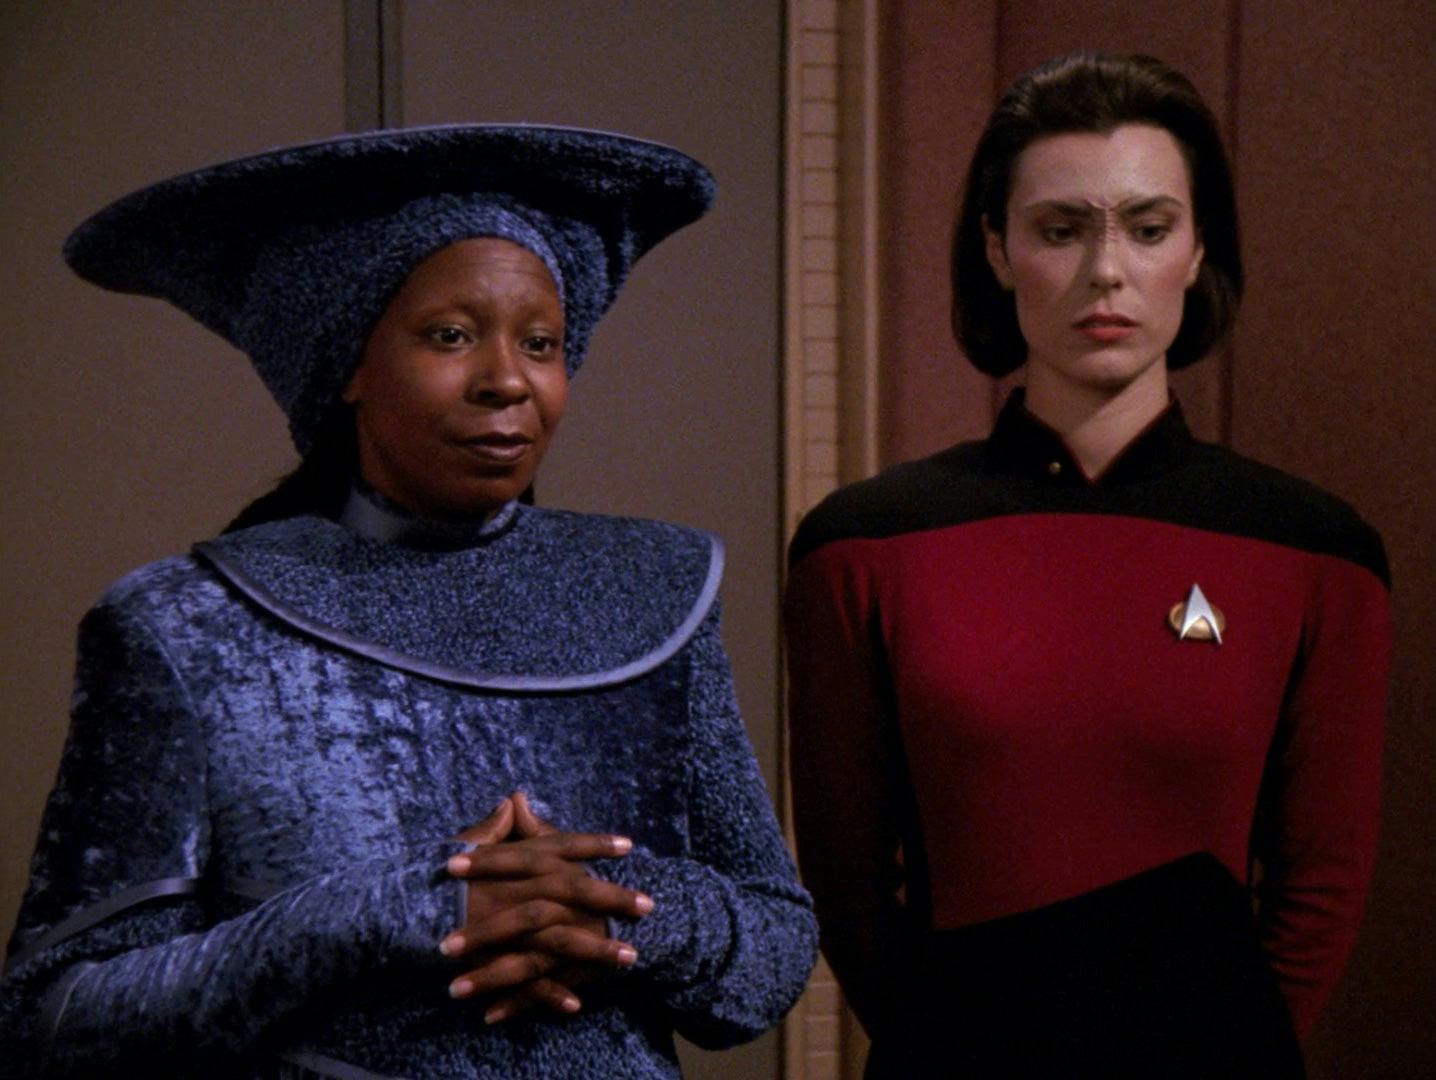 Guinan and Ro Laren stand side-by-side in Captain Picard's ready room in 'Ensign Ro'